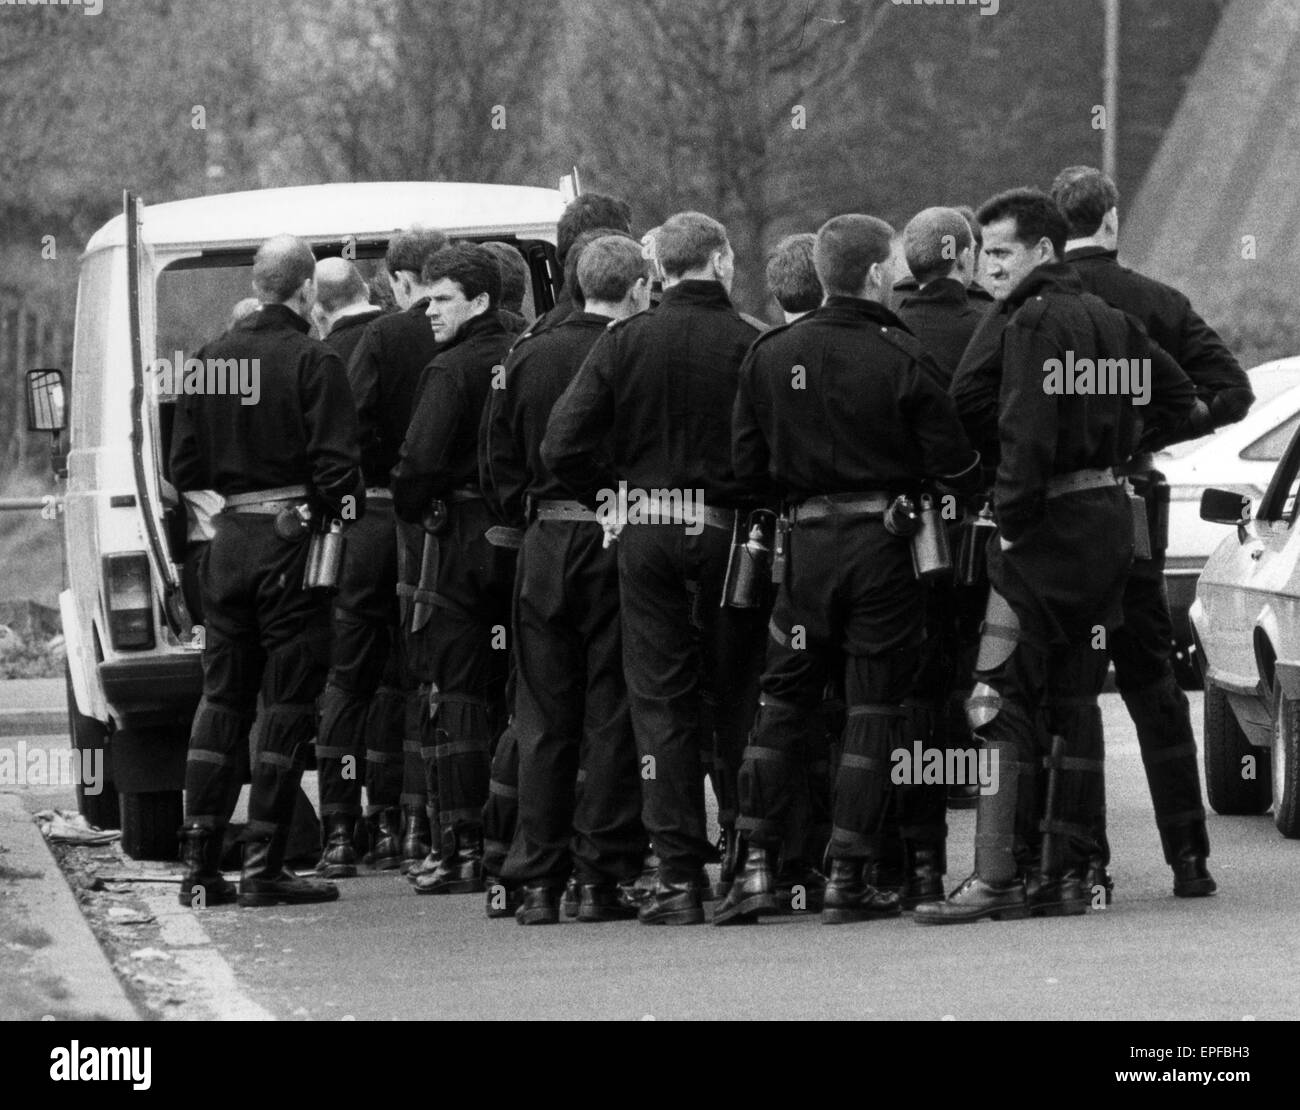 Strangeways Prison Riot April 1990. Tag Officers line up for food and drink. A 25-day prison riot and rooftop protest at Strangeways Prison in Manchester, England. The riot began on the 1st April 1990 when prisoners took control of the prison chapel, and Stock Photo